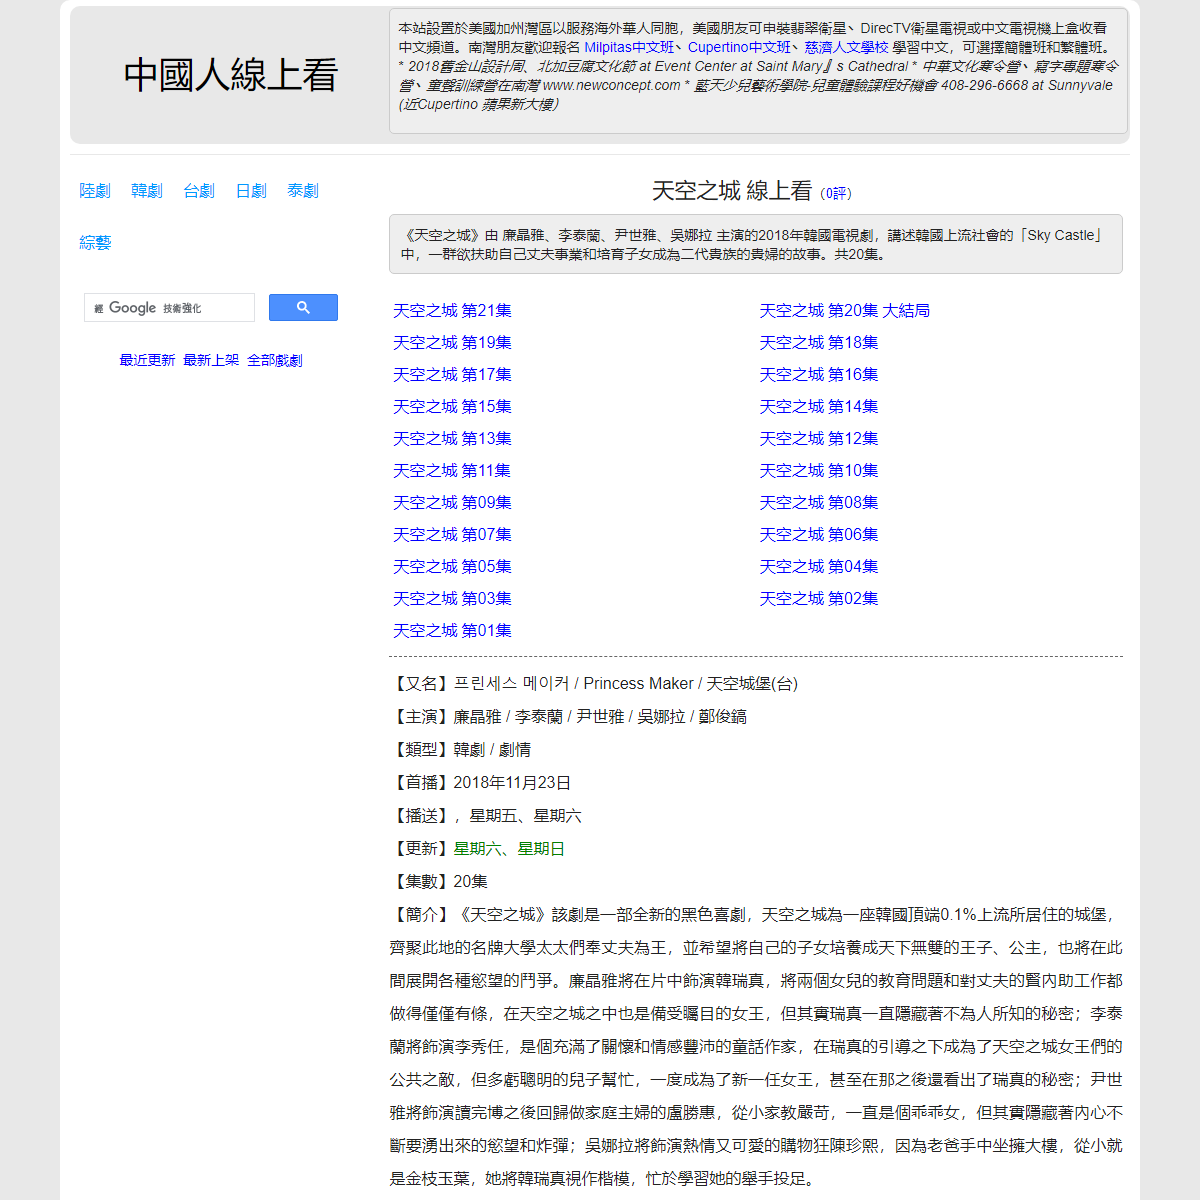 A complete backup of https://chinaq.tv/kr181123/